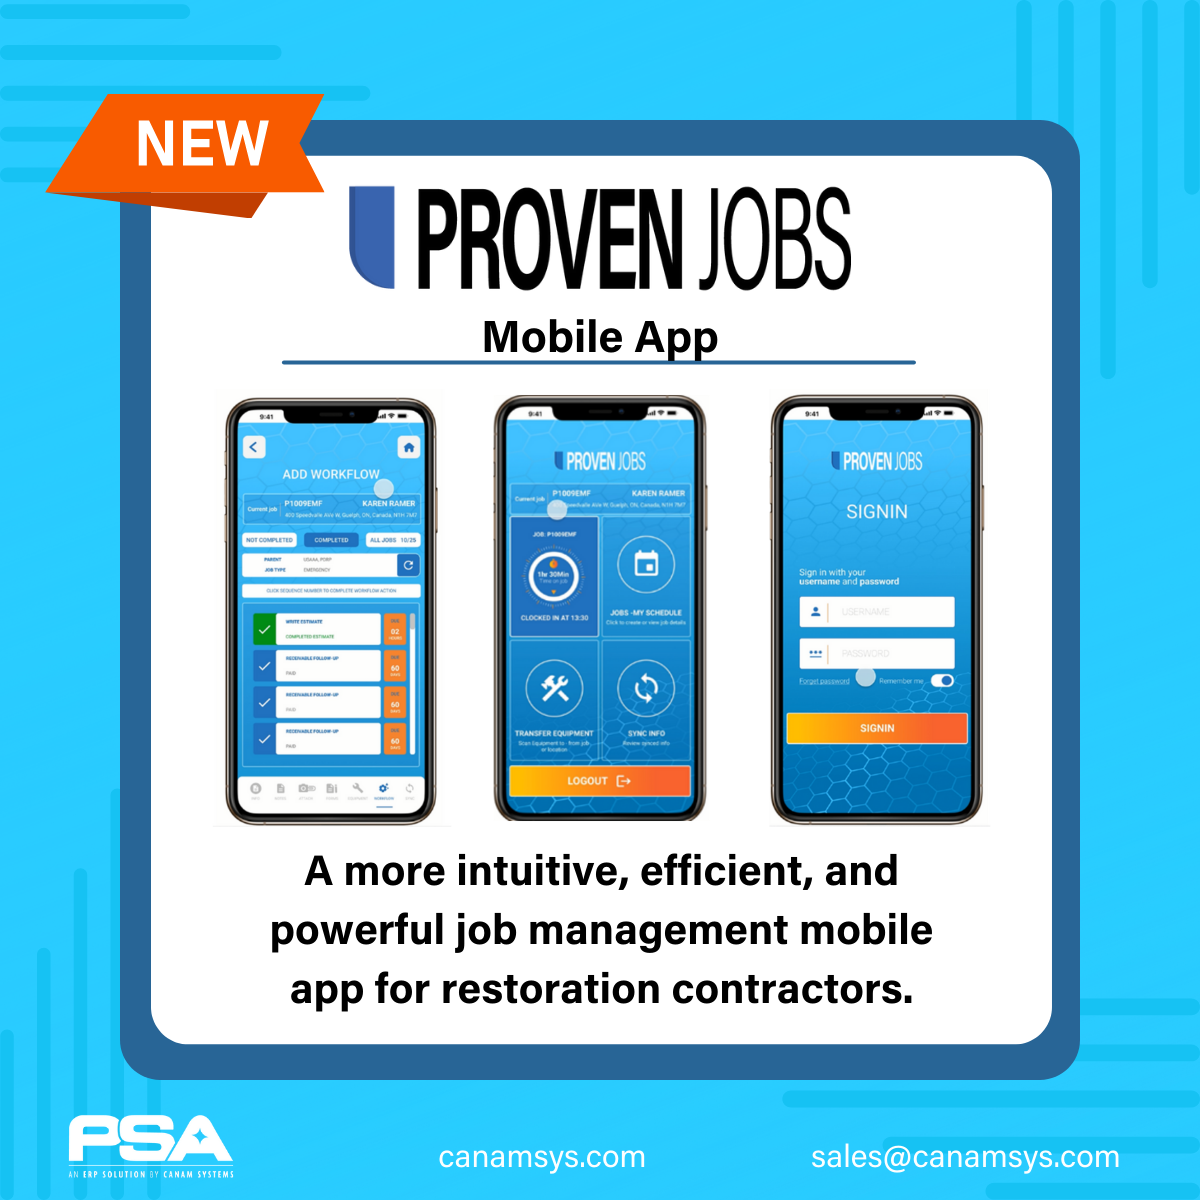 Are you ready for the NEW Proven Jobs Mobile app?